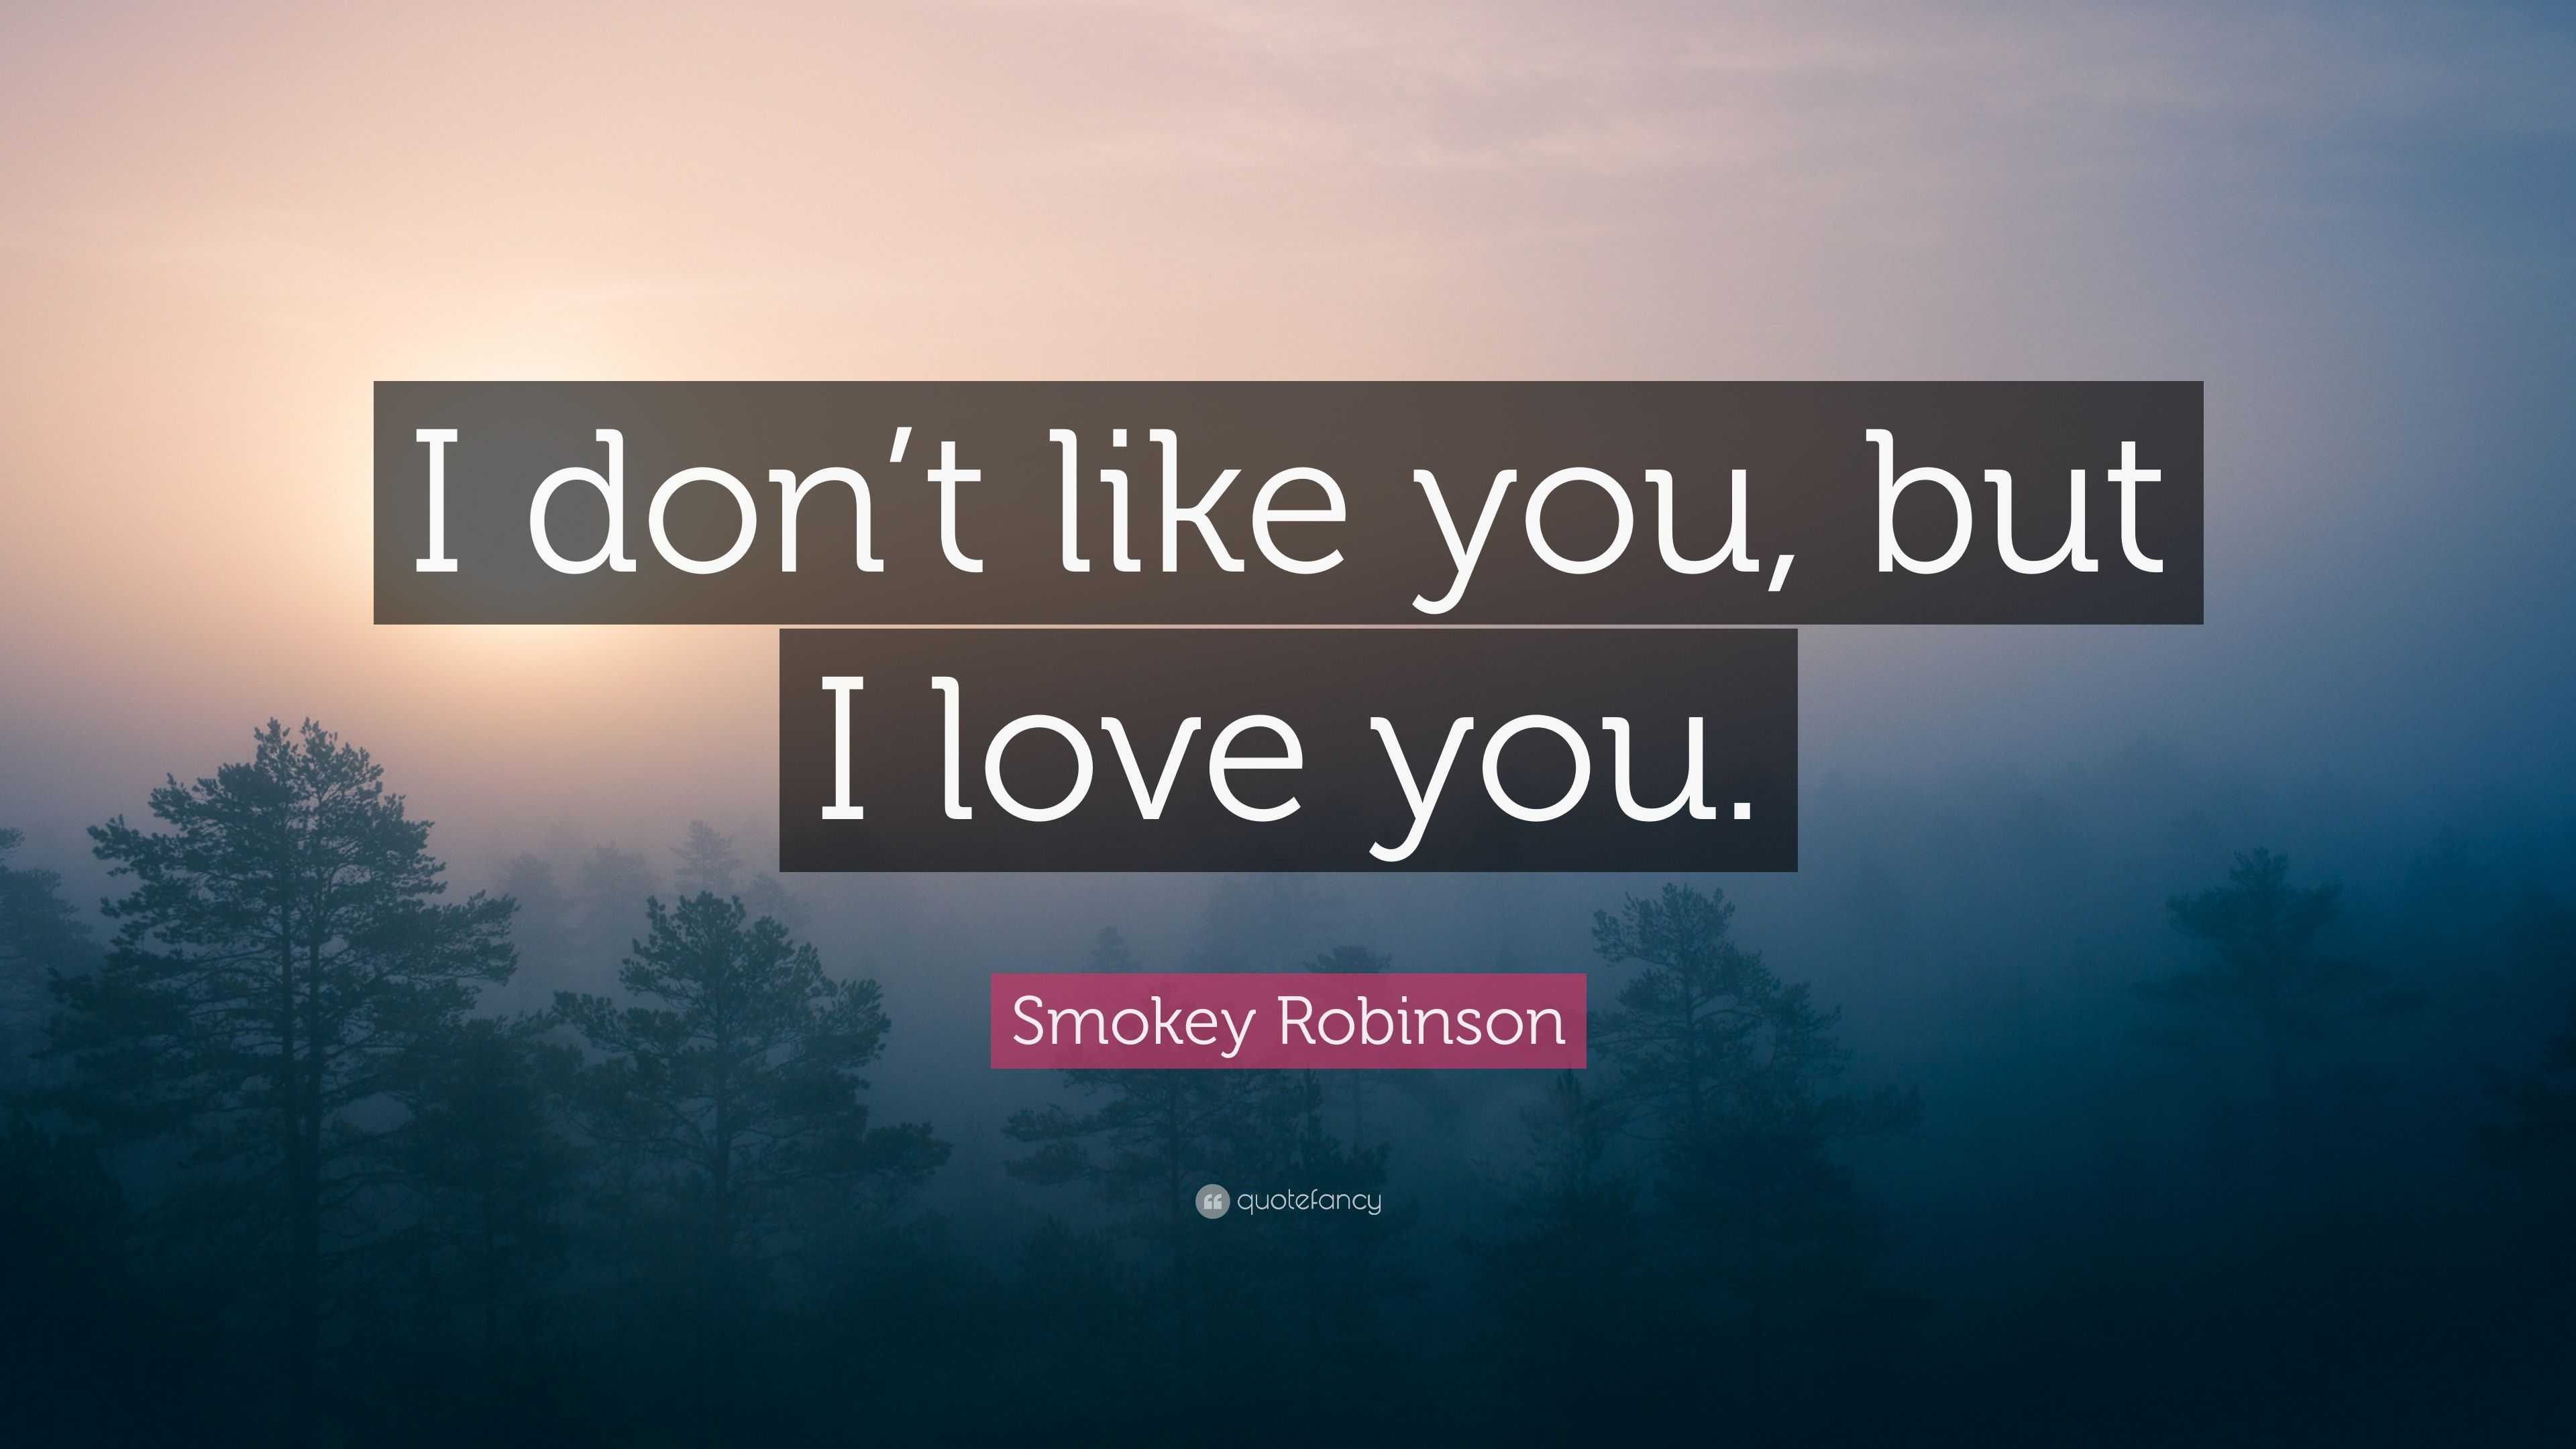 Smokey Robinson Quote “I don t like you but I love you